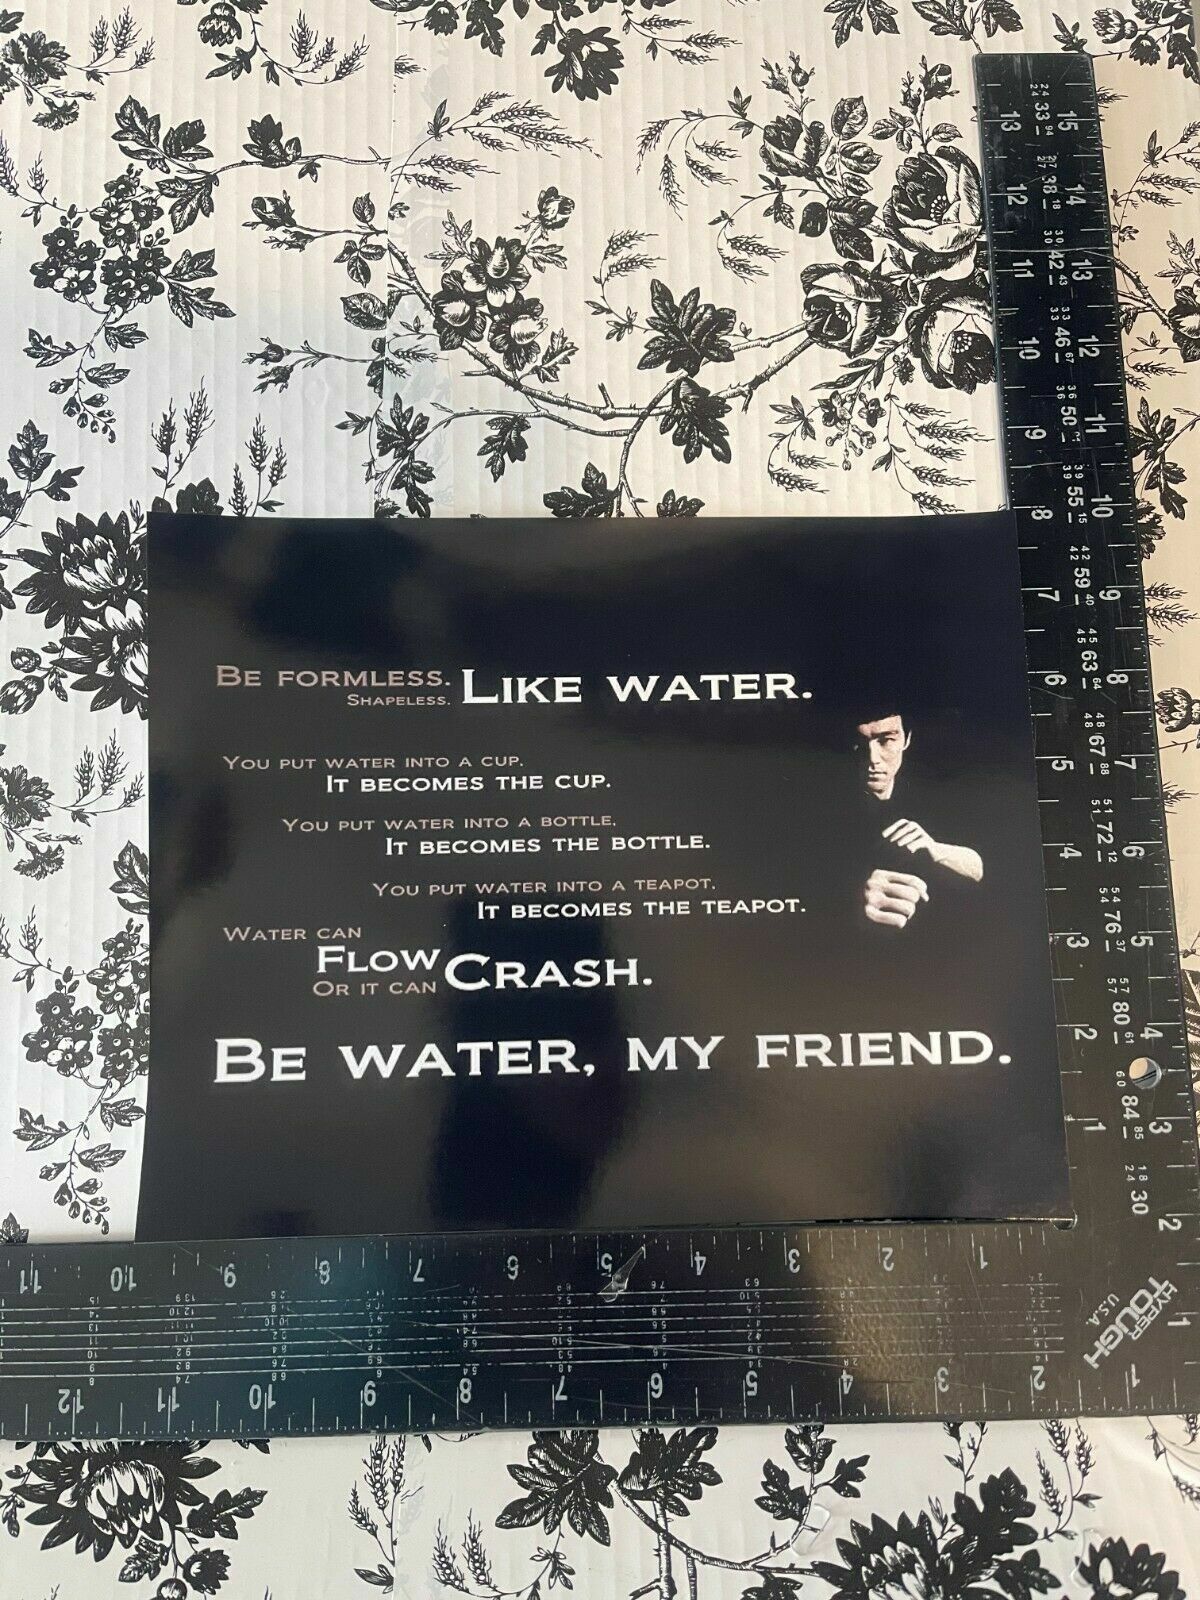 Actor Bruce Lee Quote Be formless like water shapeless 8x10 Publicity Photo